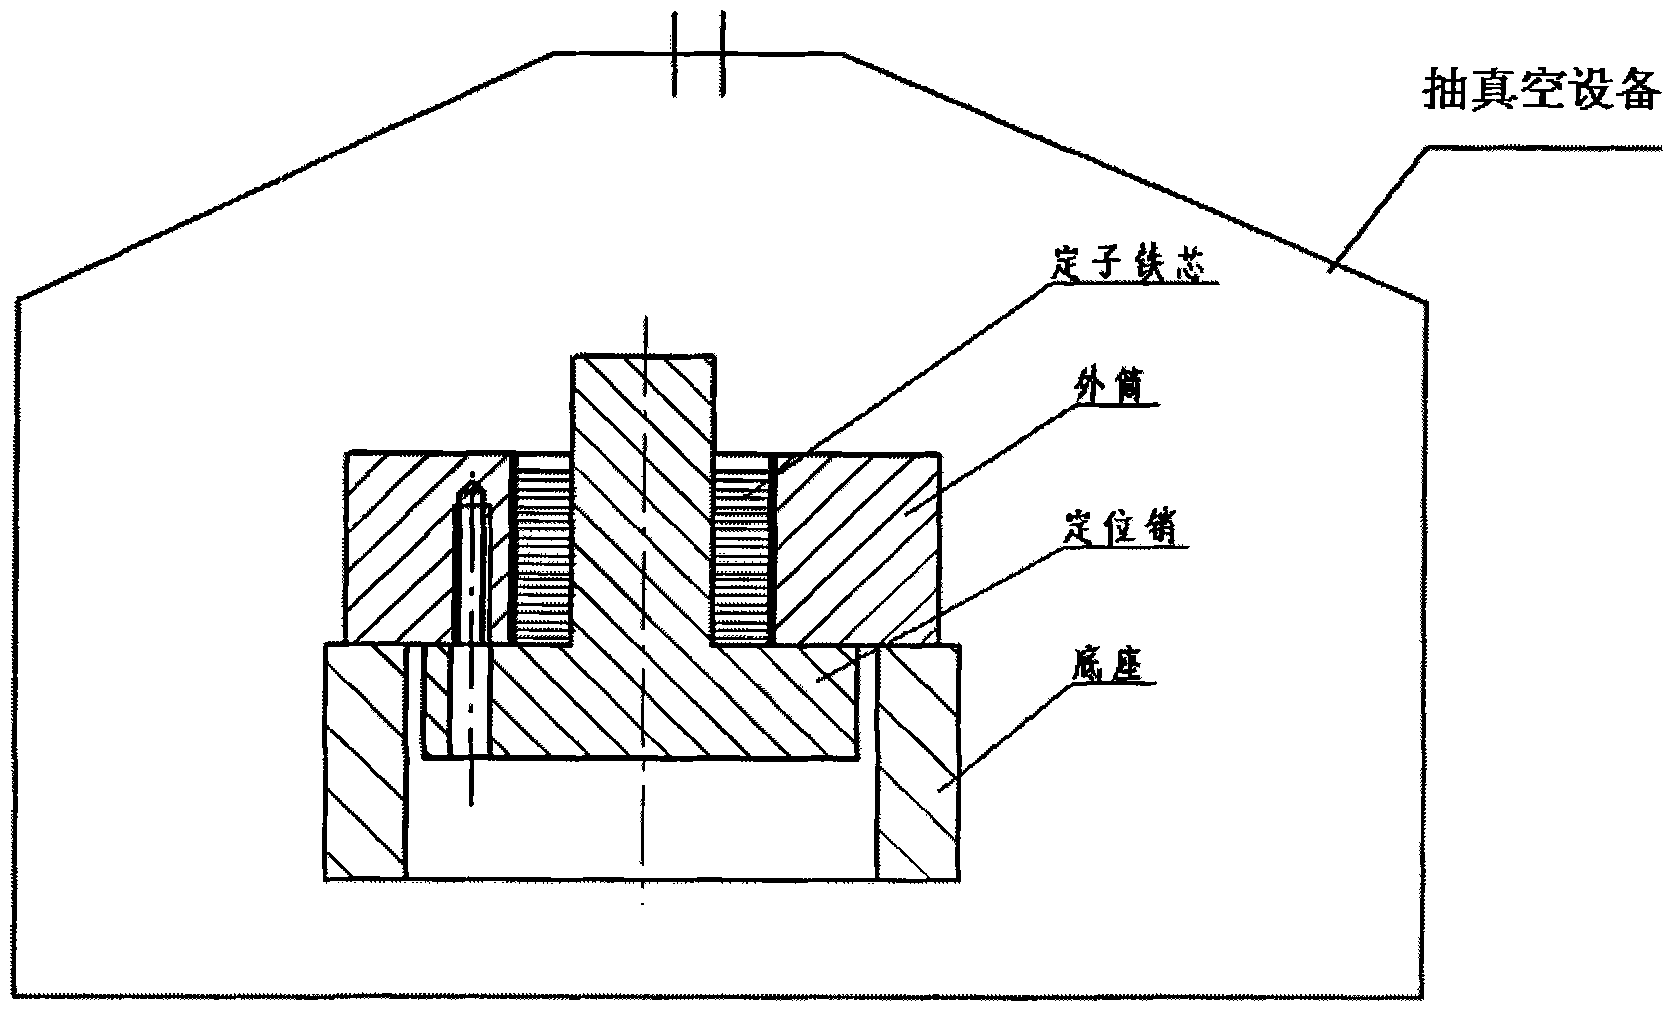 Adhesive filling and grinding processing method for stator-rotor iron core component of motor